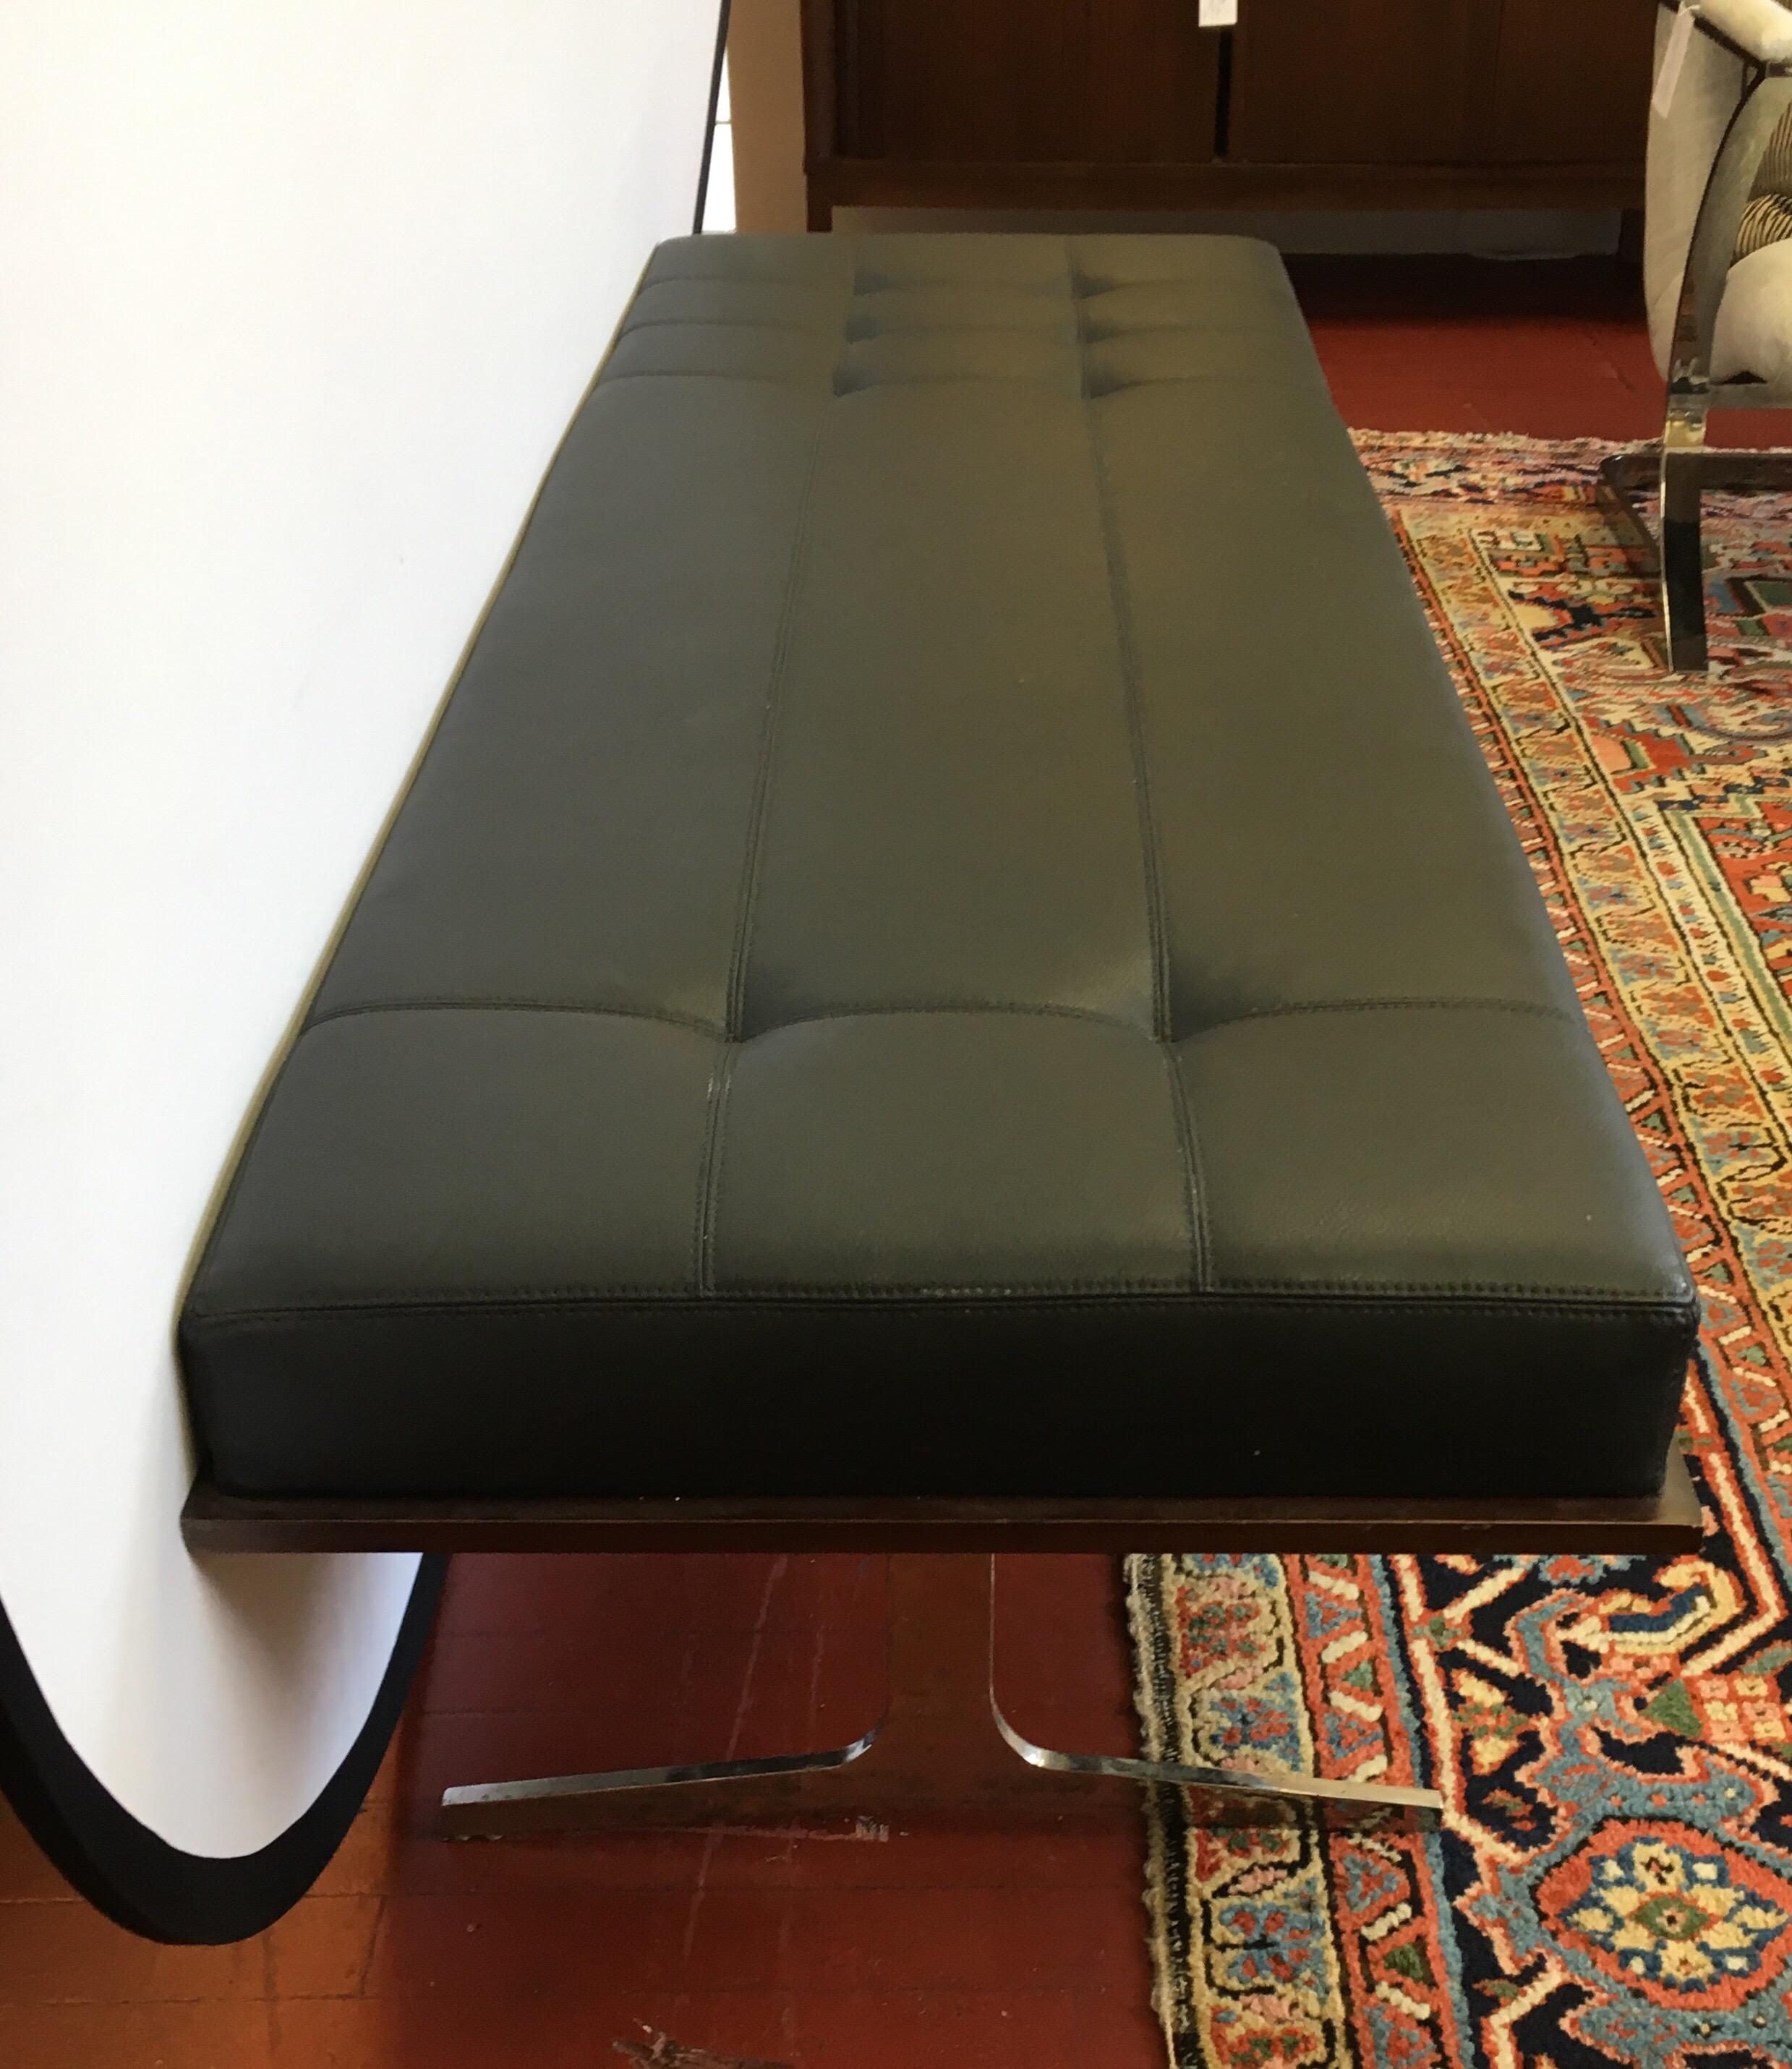 Steel Bernhardt Black Leather and Mahogany Chaise Lounge Settee Lounger Daybed